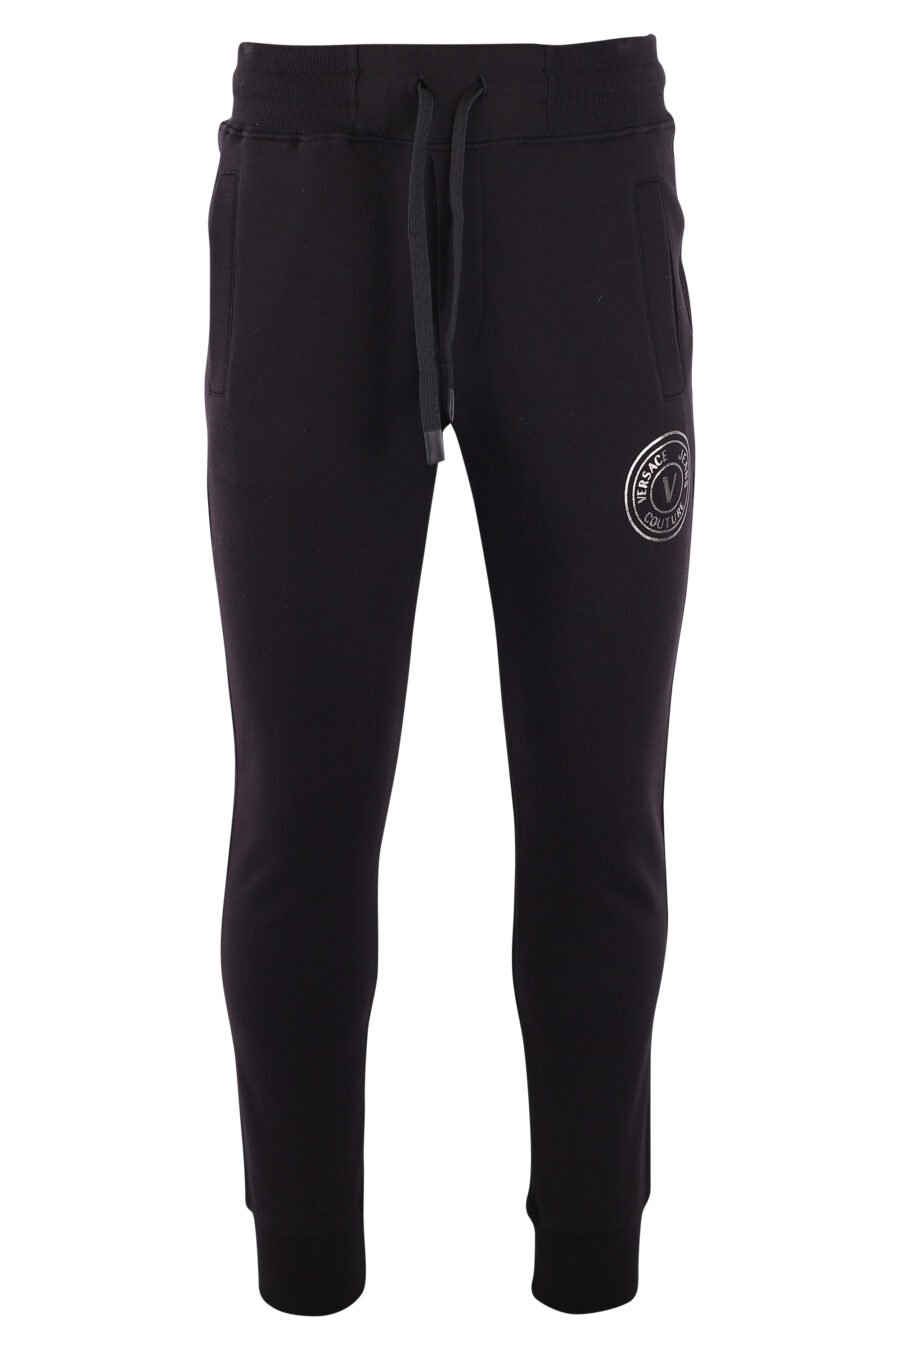 Tracksuit bottoms black with silver round logo - IMG 3217